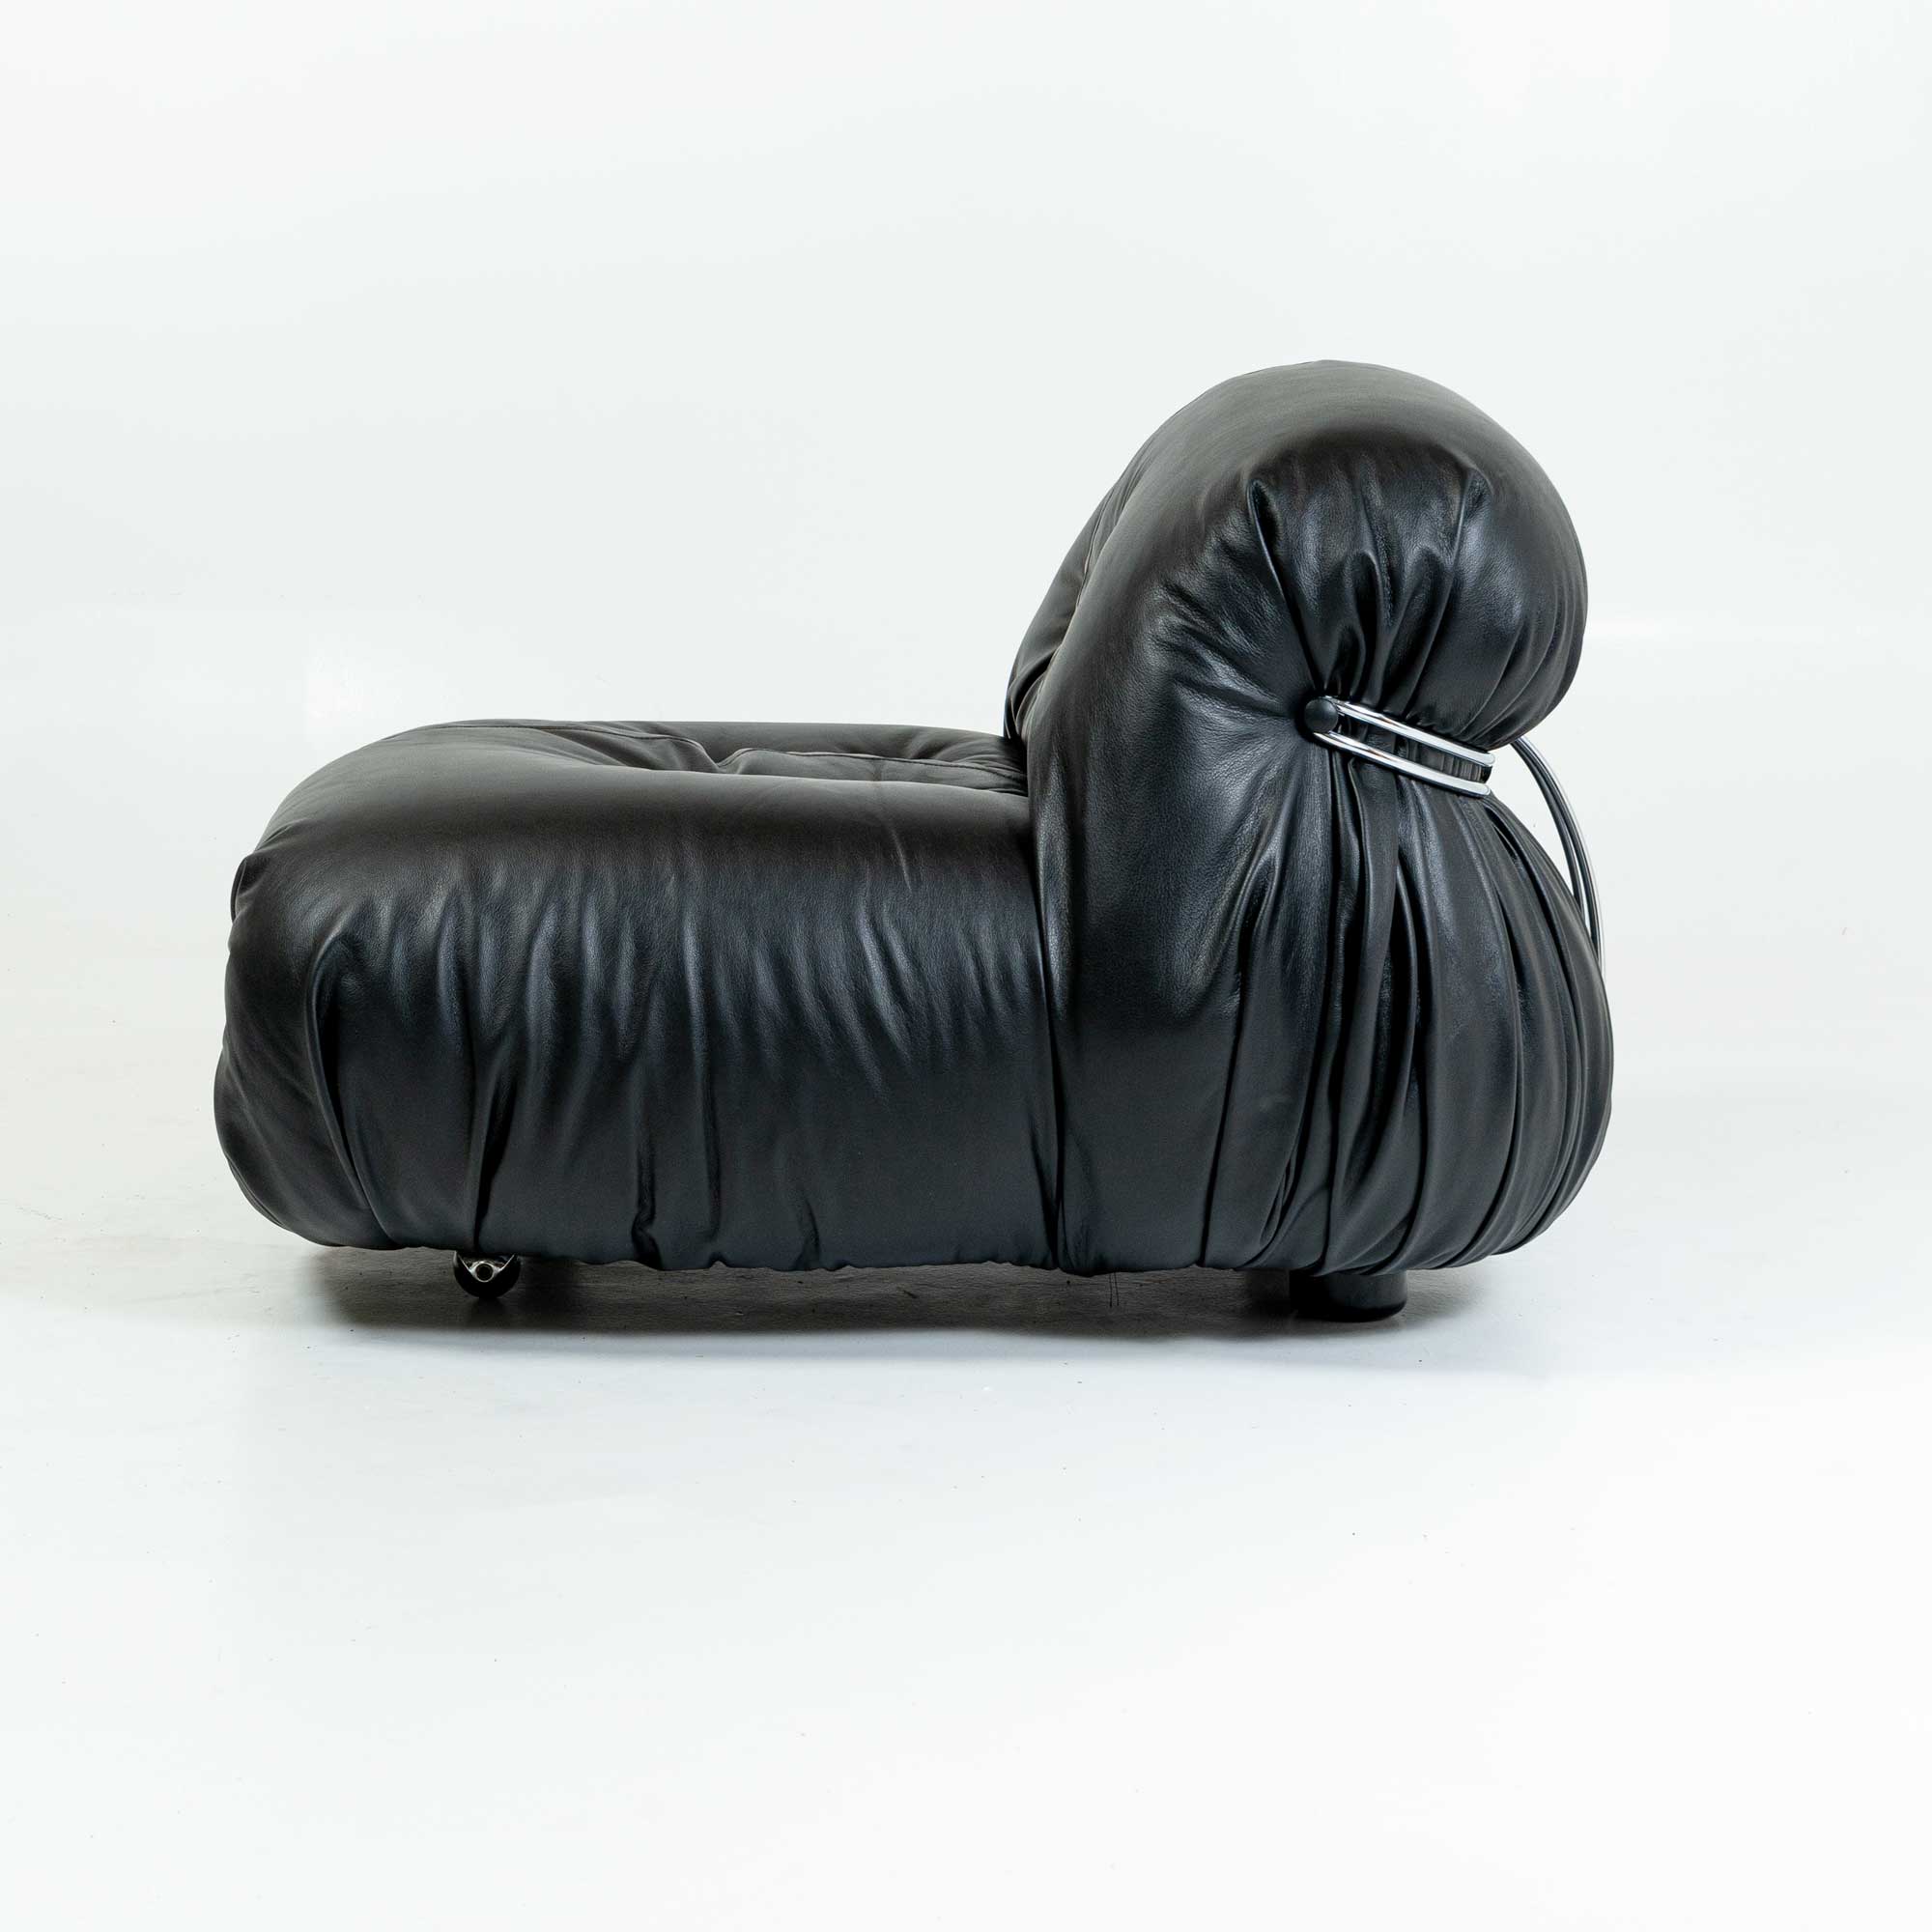 Soriana Lounge Chair by Afra & Tobia Scarpa for Cassina 1970s in black leather